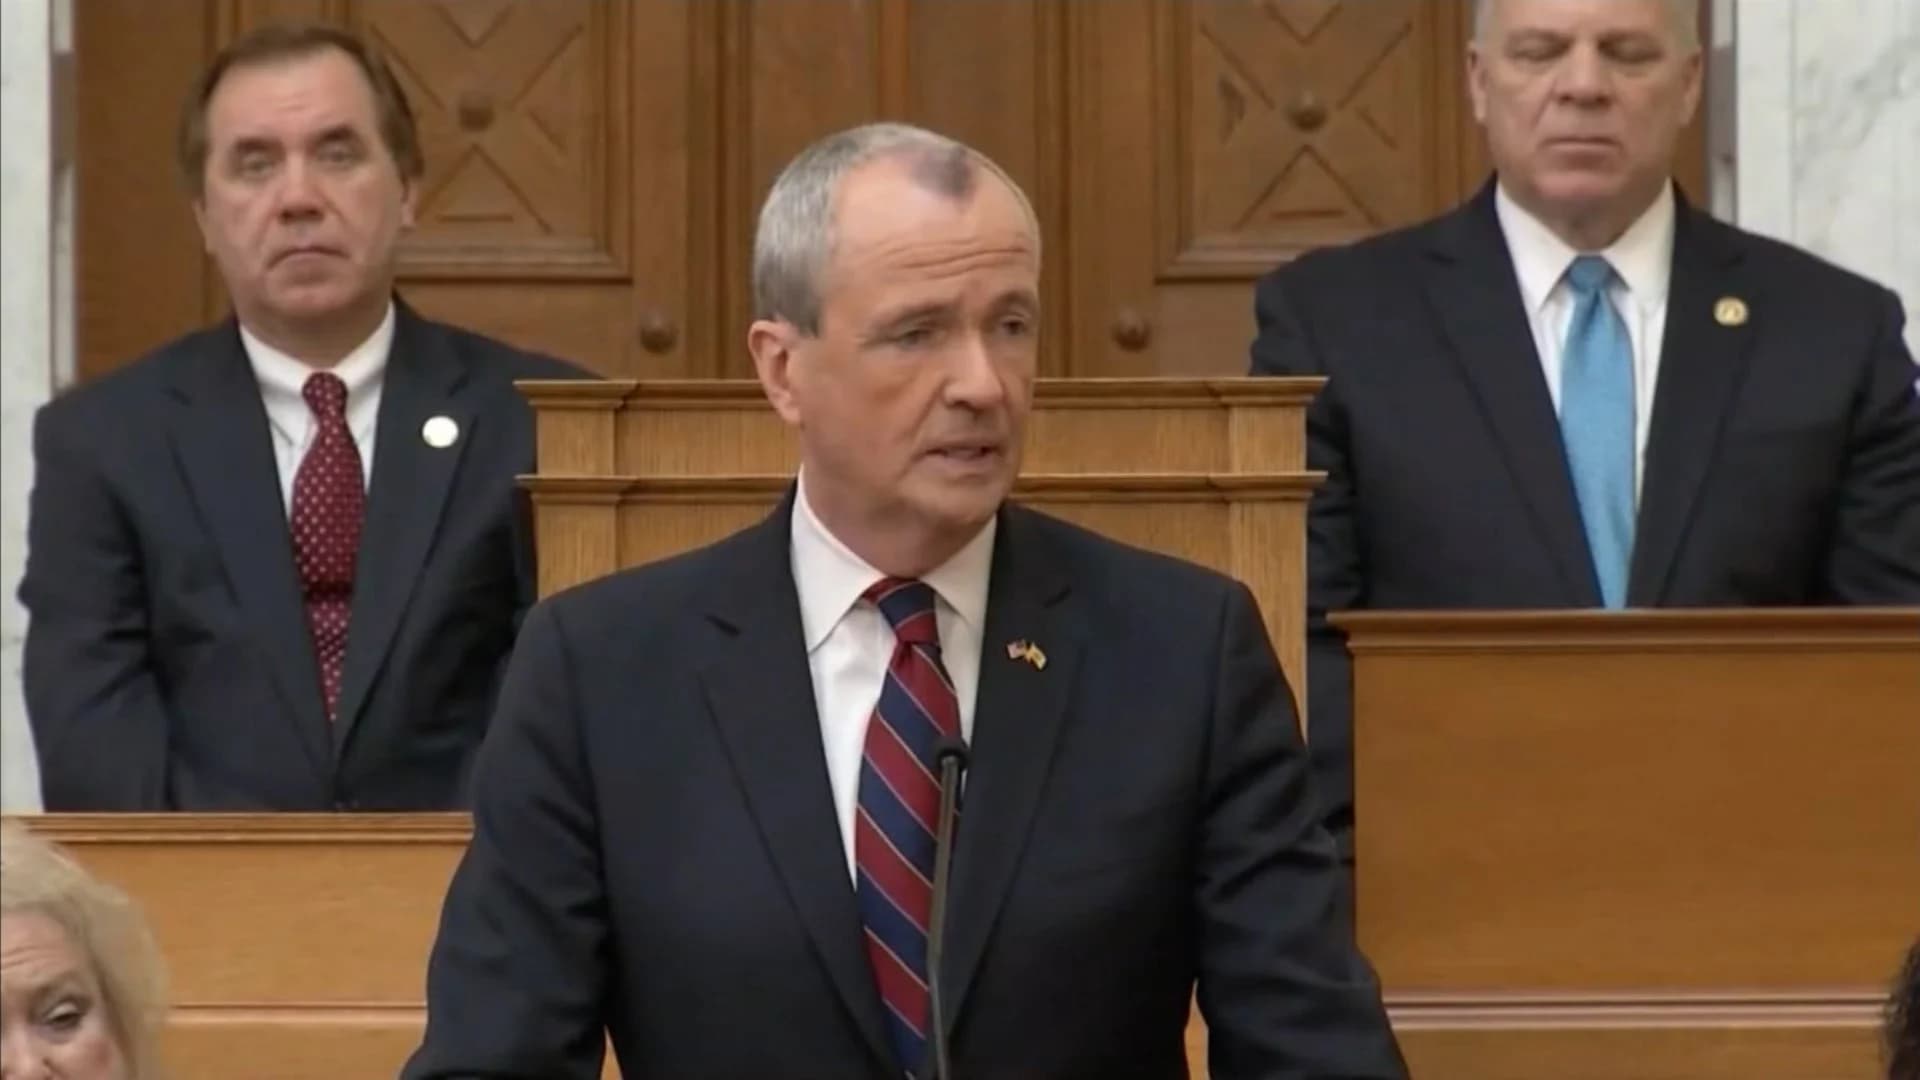 Gov. Murphy: 2019 spending blueprint will put forward ‘significant and sustainable savings’